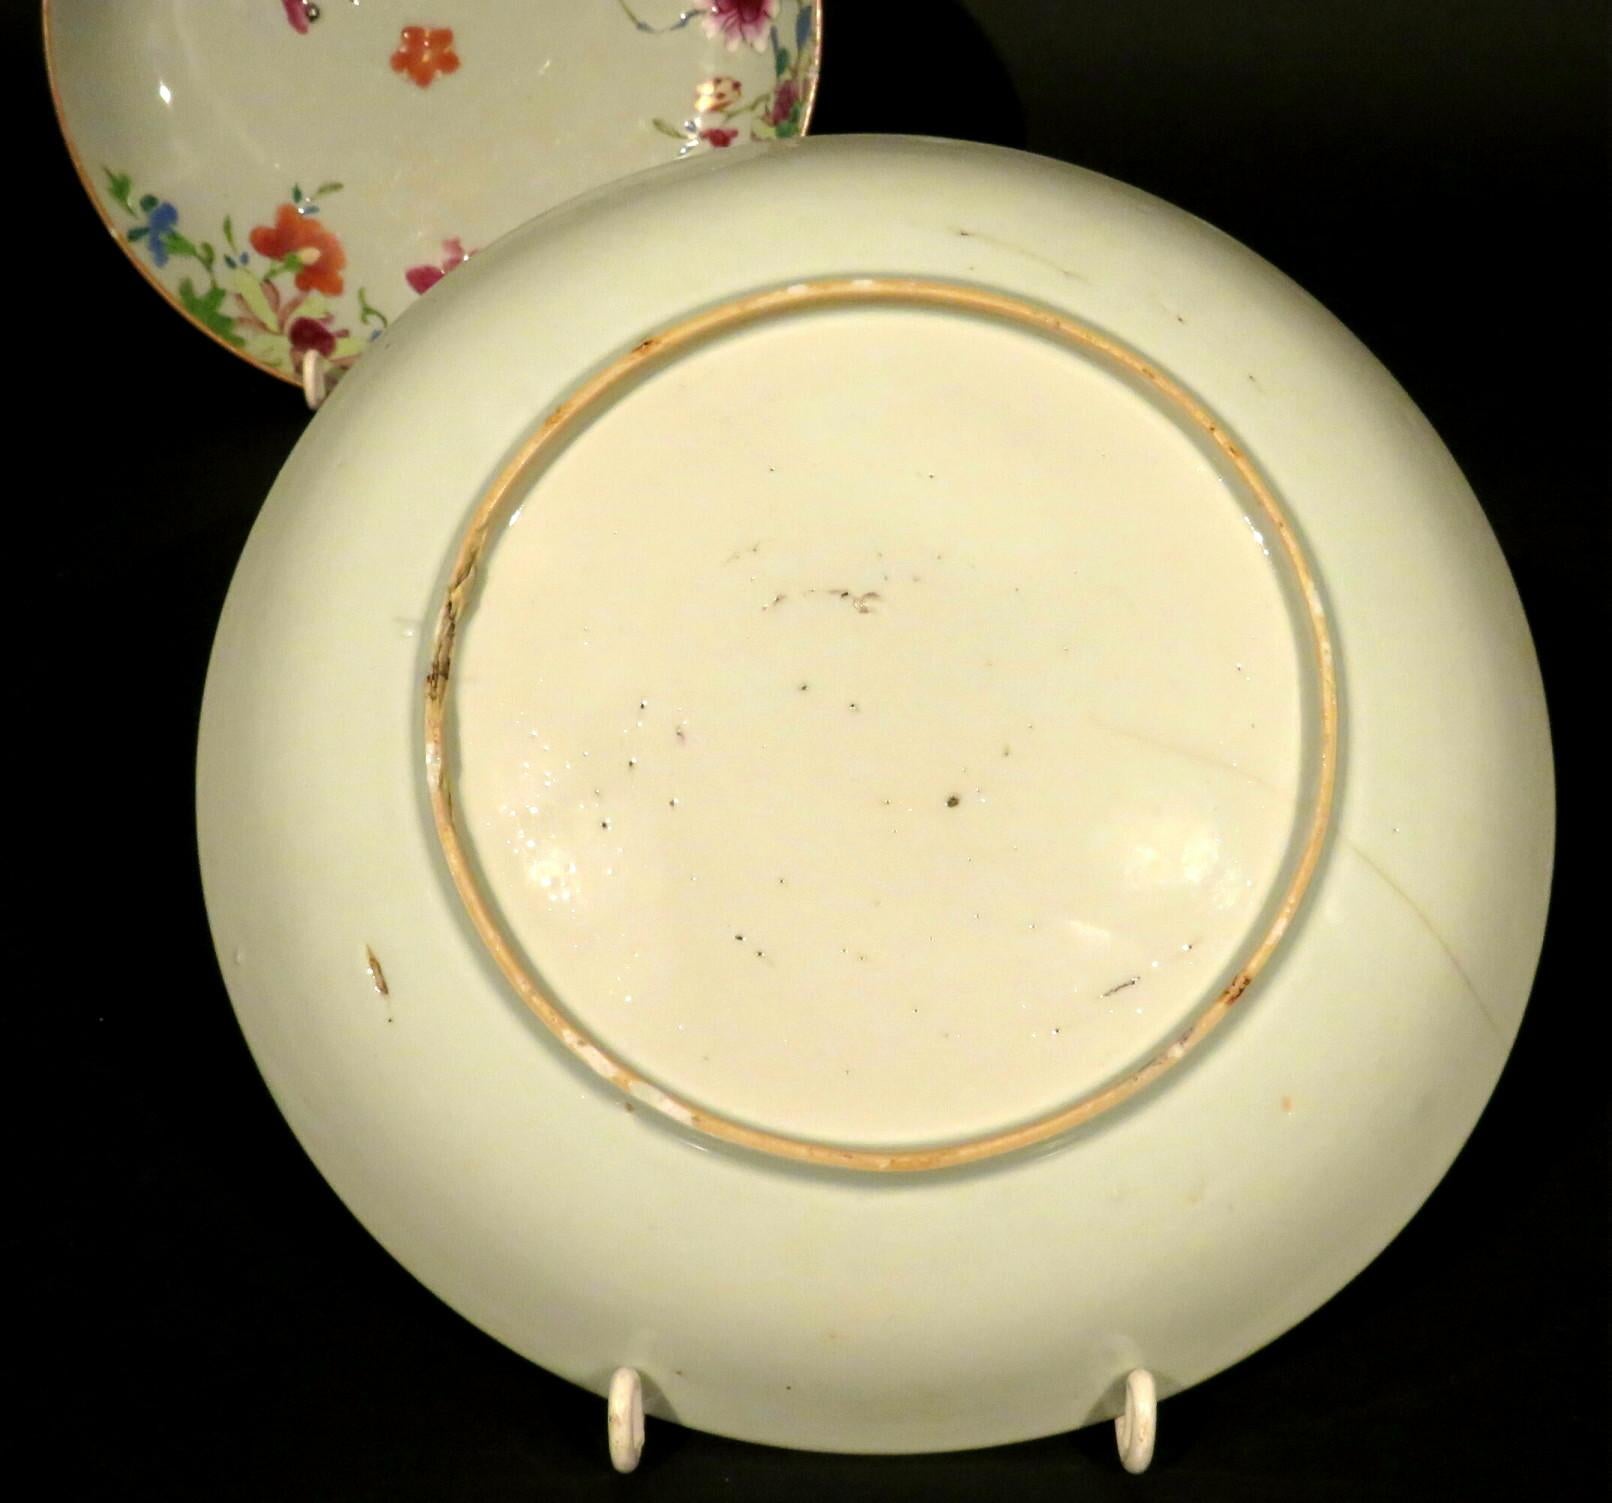 18th Century Pair of Chinese Export Celadon Porcelain Dishes, Qianlong Period (1736-1795)